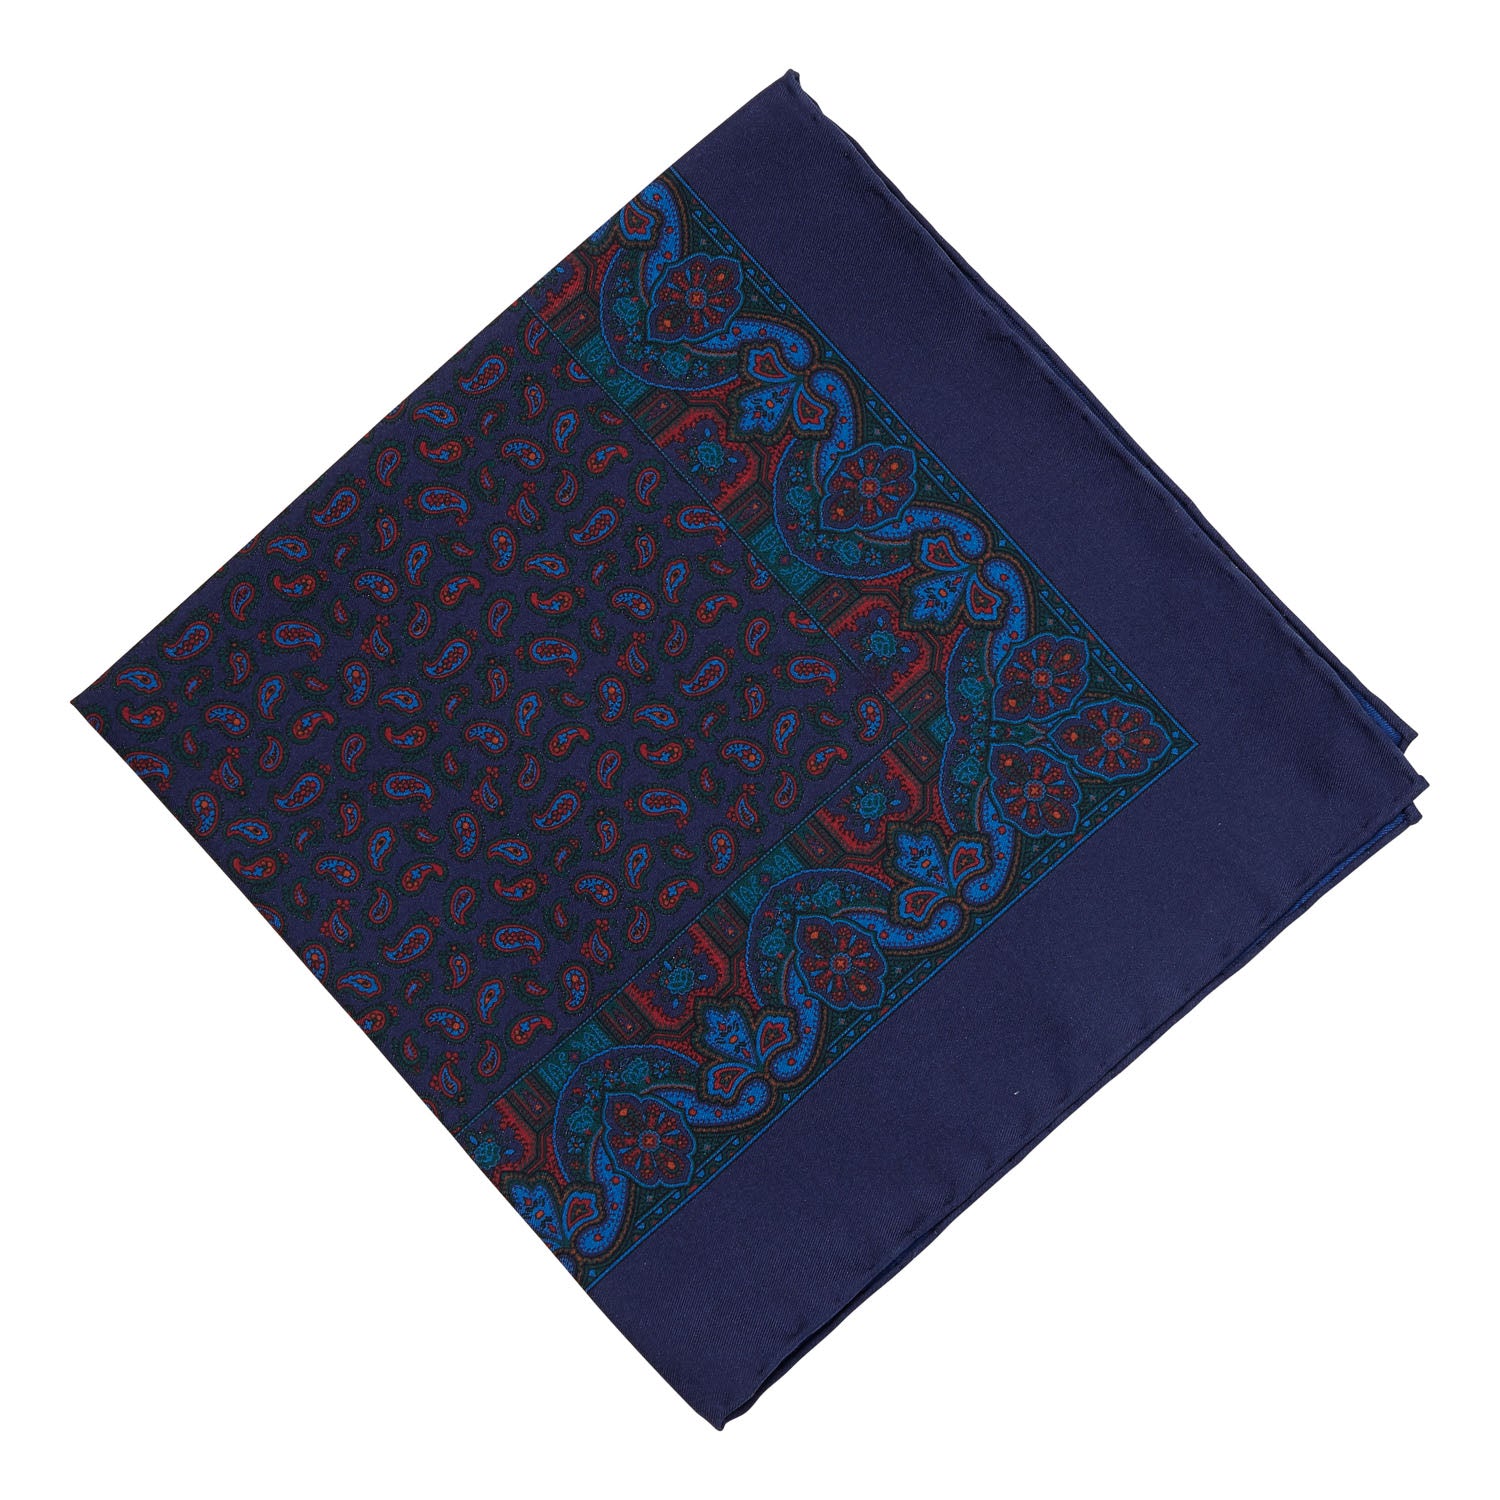 A Sovereign Grade Ancient Madder Midnight Paisley pocket square from KirbyAllison.com, with hand-rolled edges on a white background.